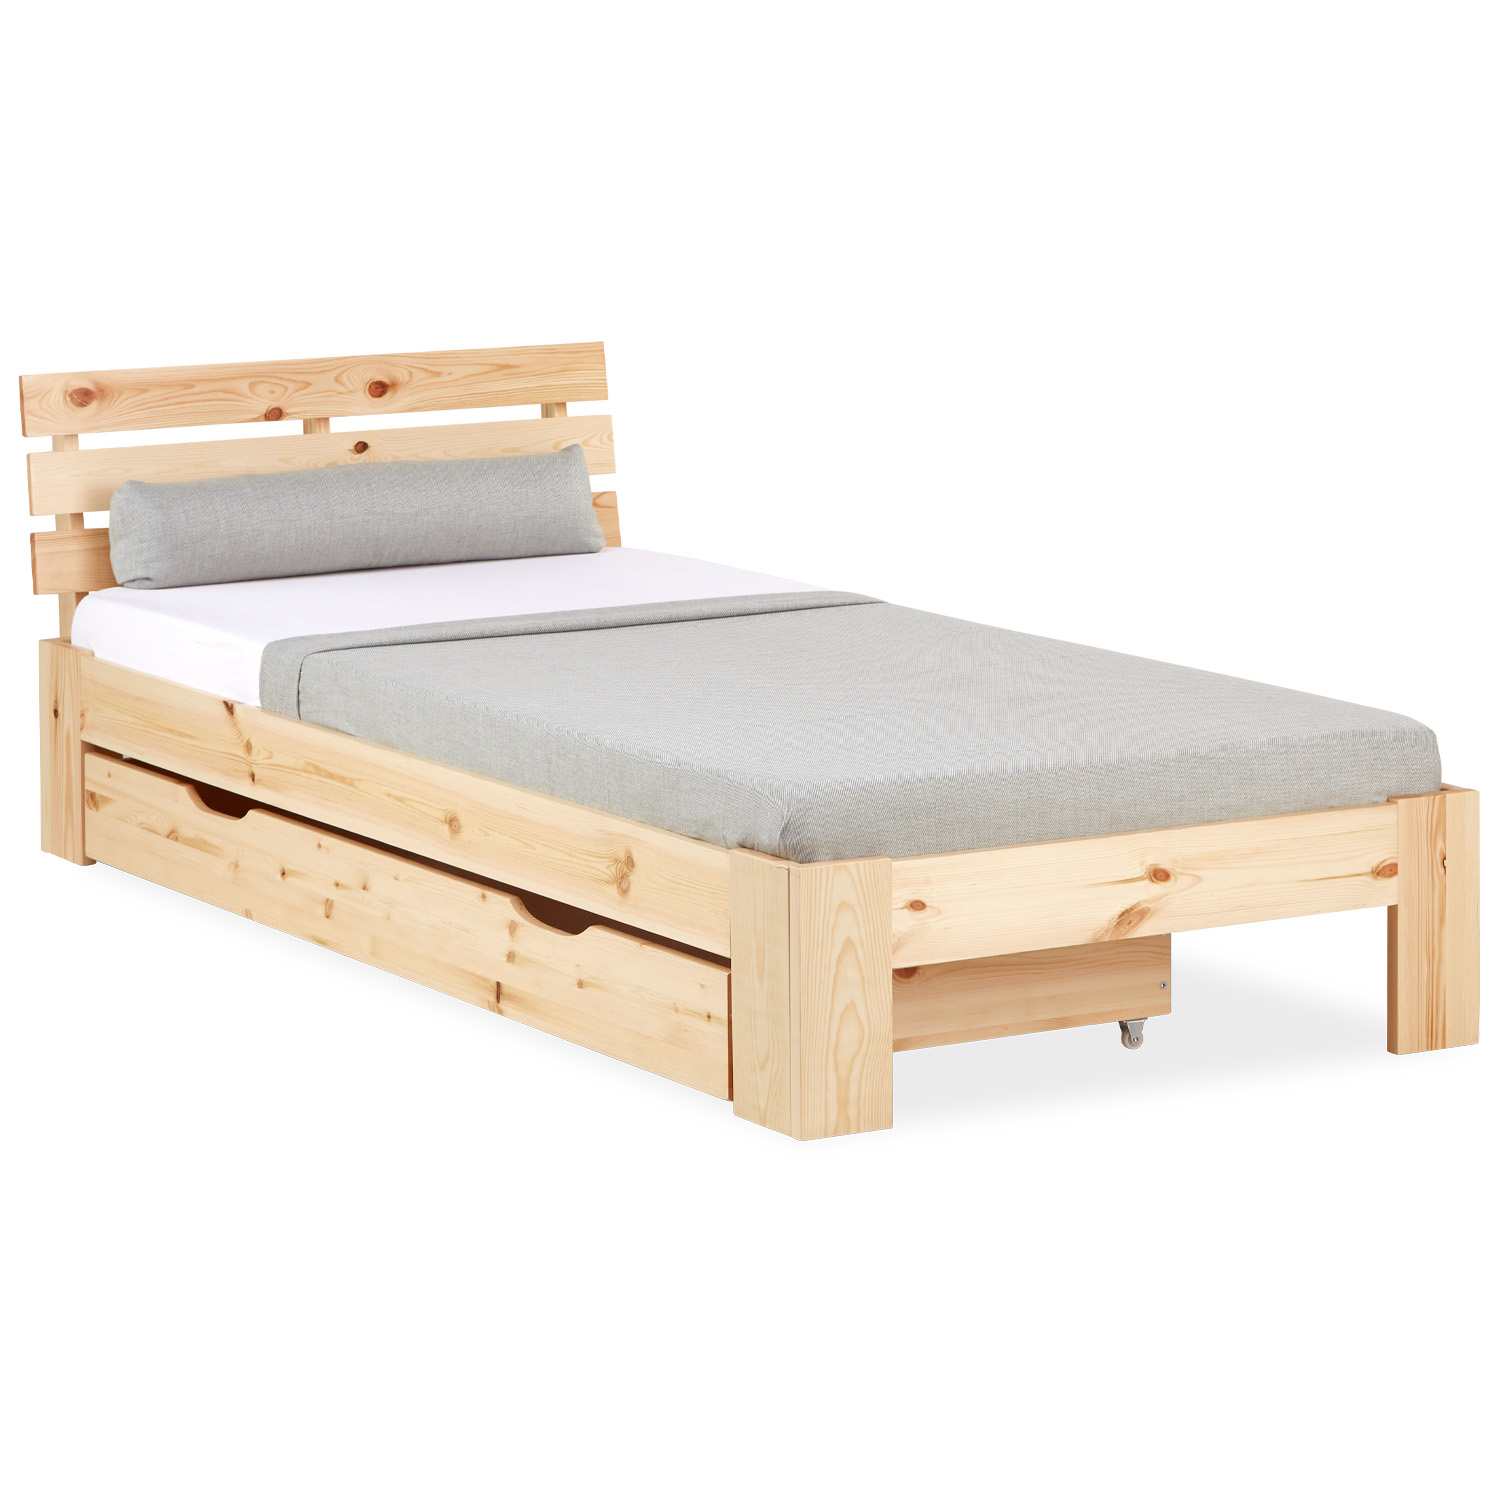 Single Bed 90x200 with Drawer Wooden Bed Slatted Frame Nature Bed Bedstead Solid Wood